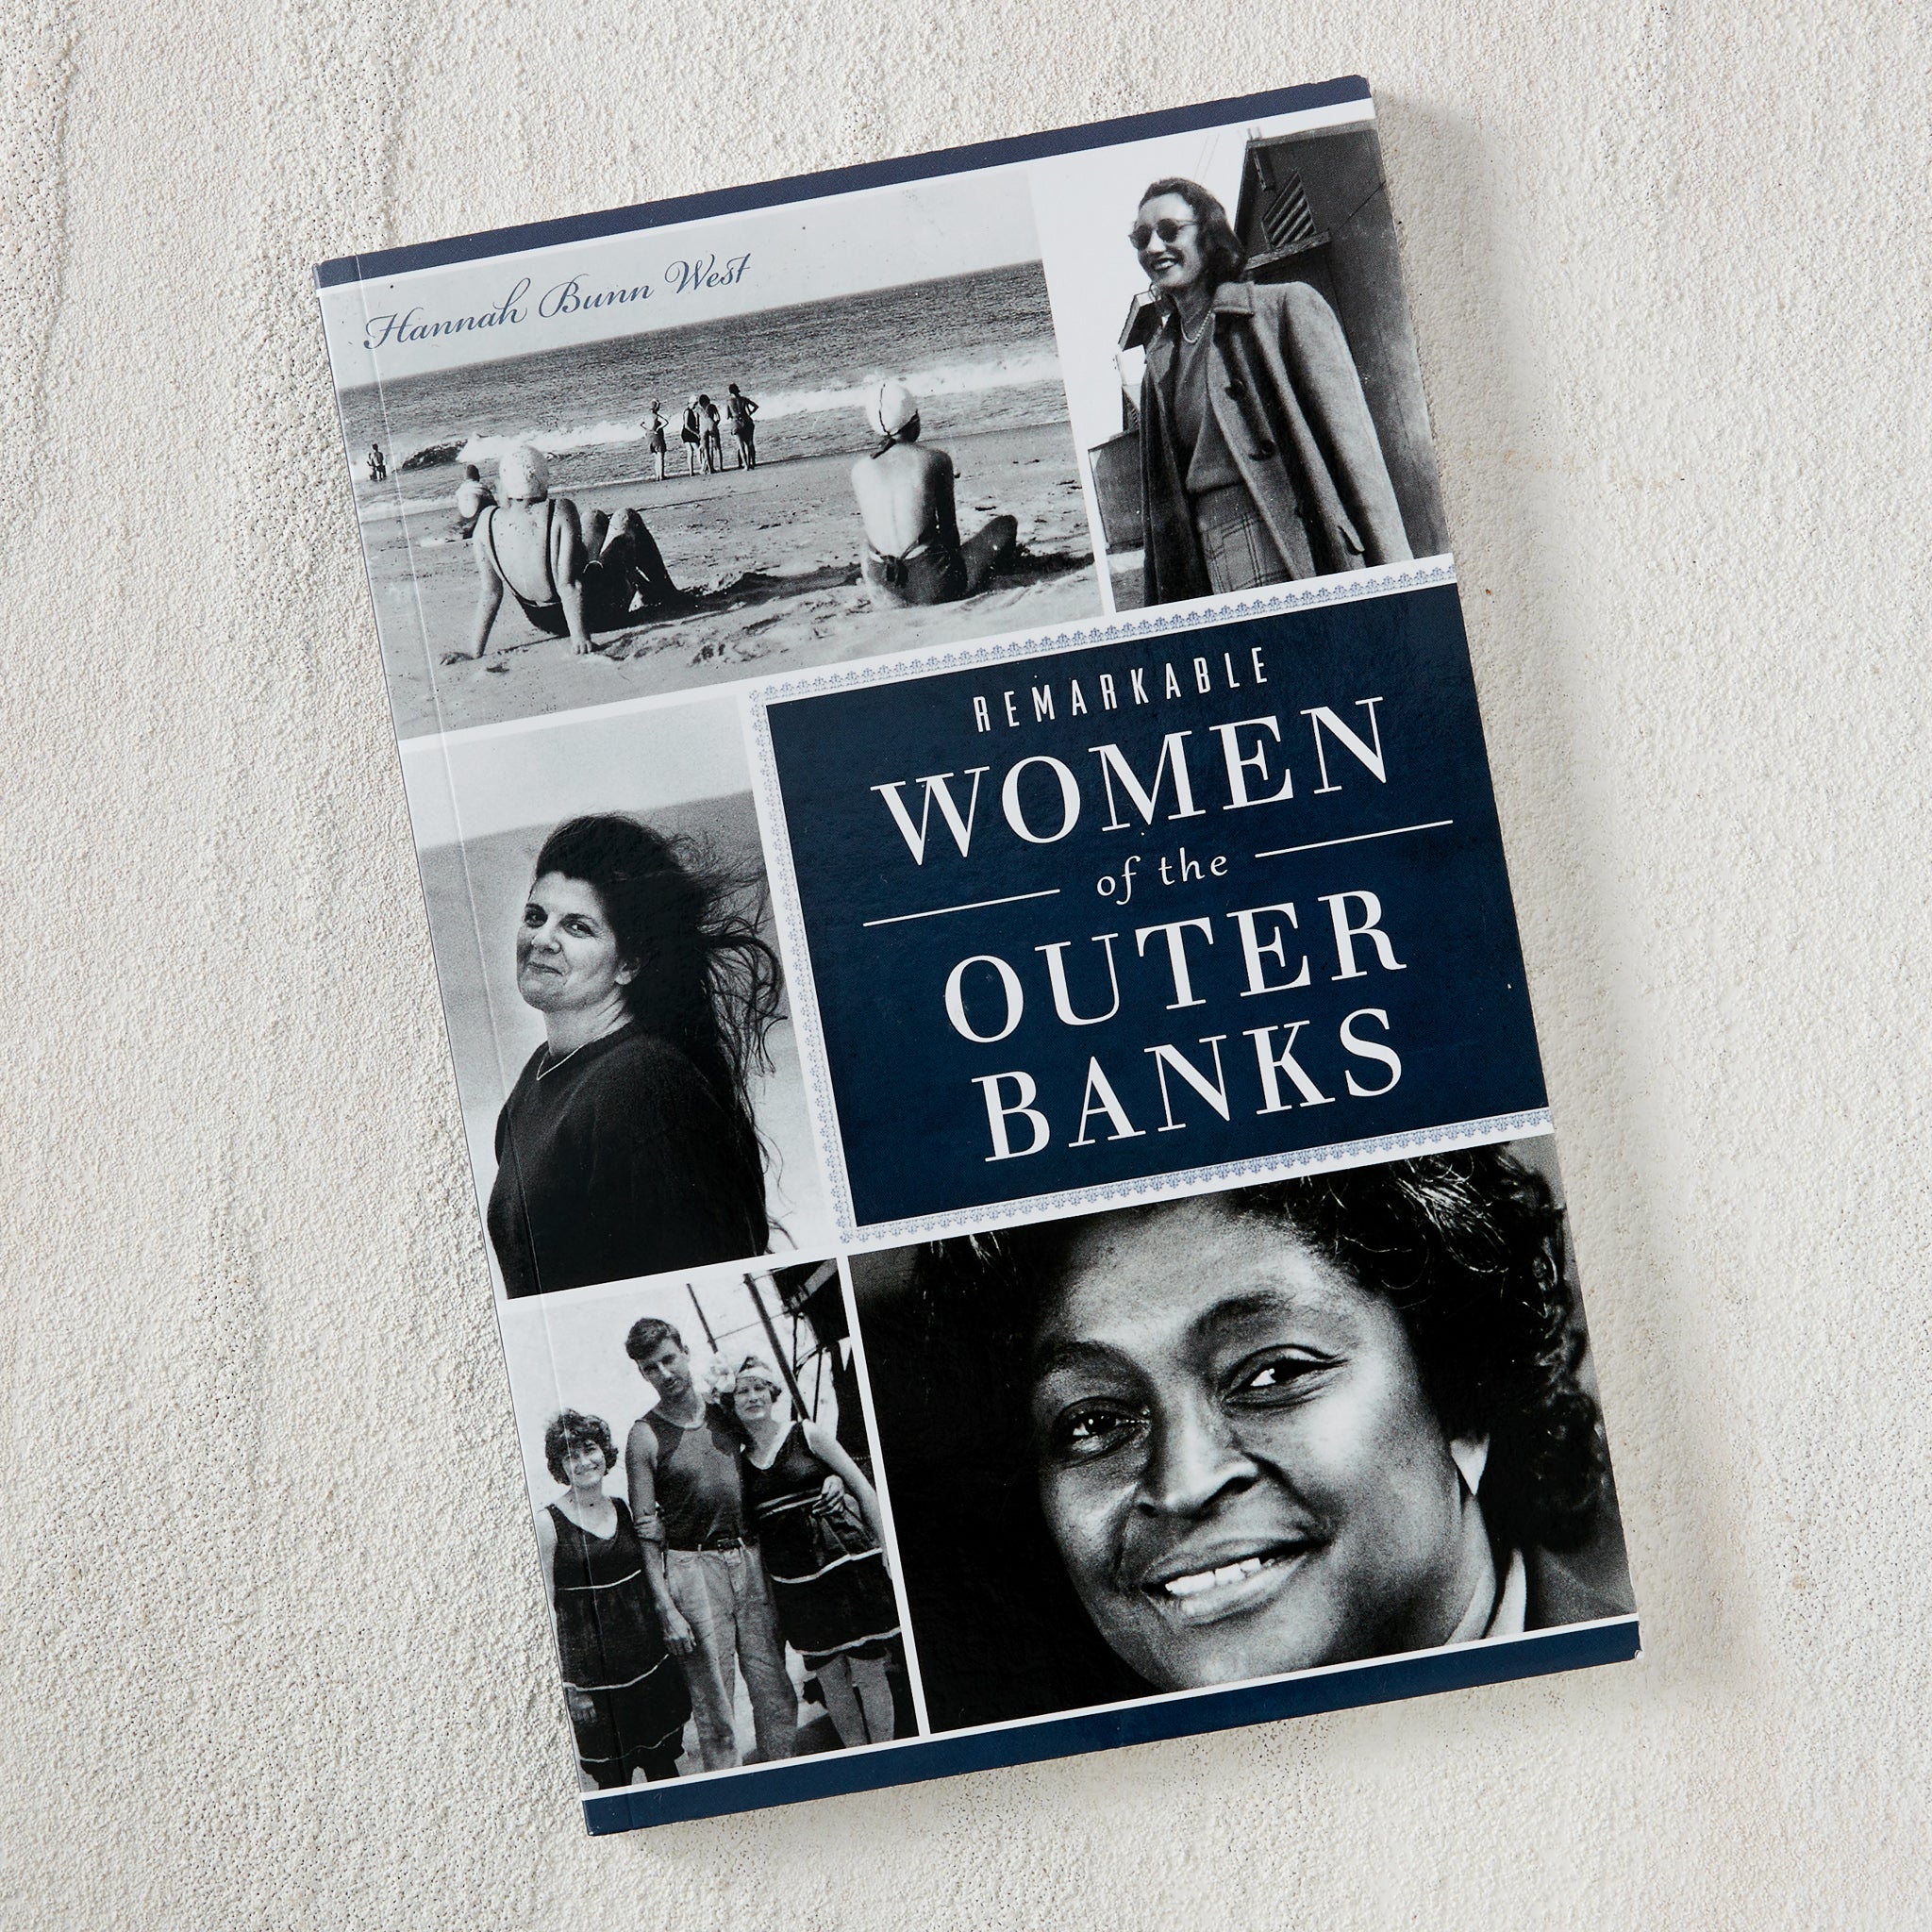 Remarkable Women of the Outer Banks Book